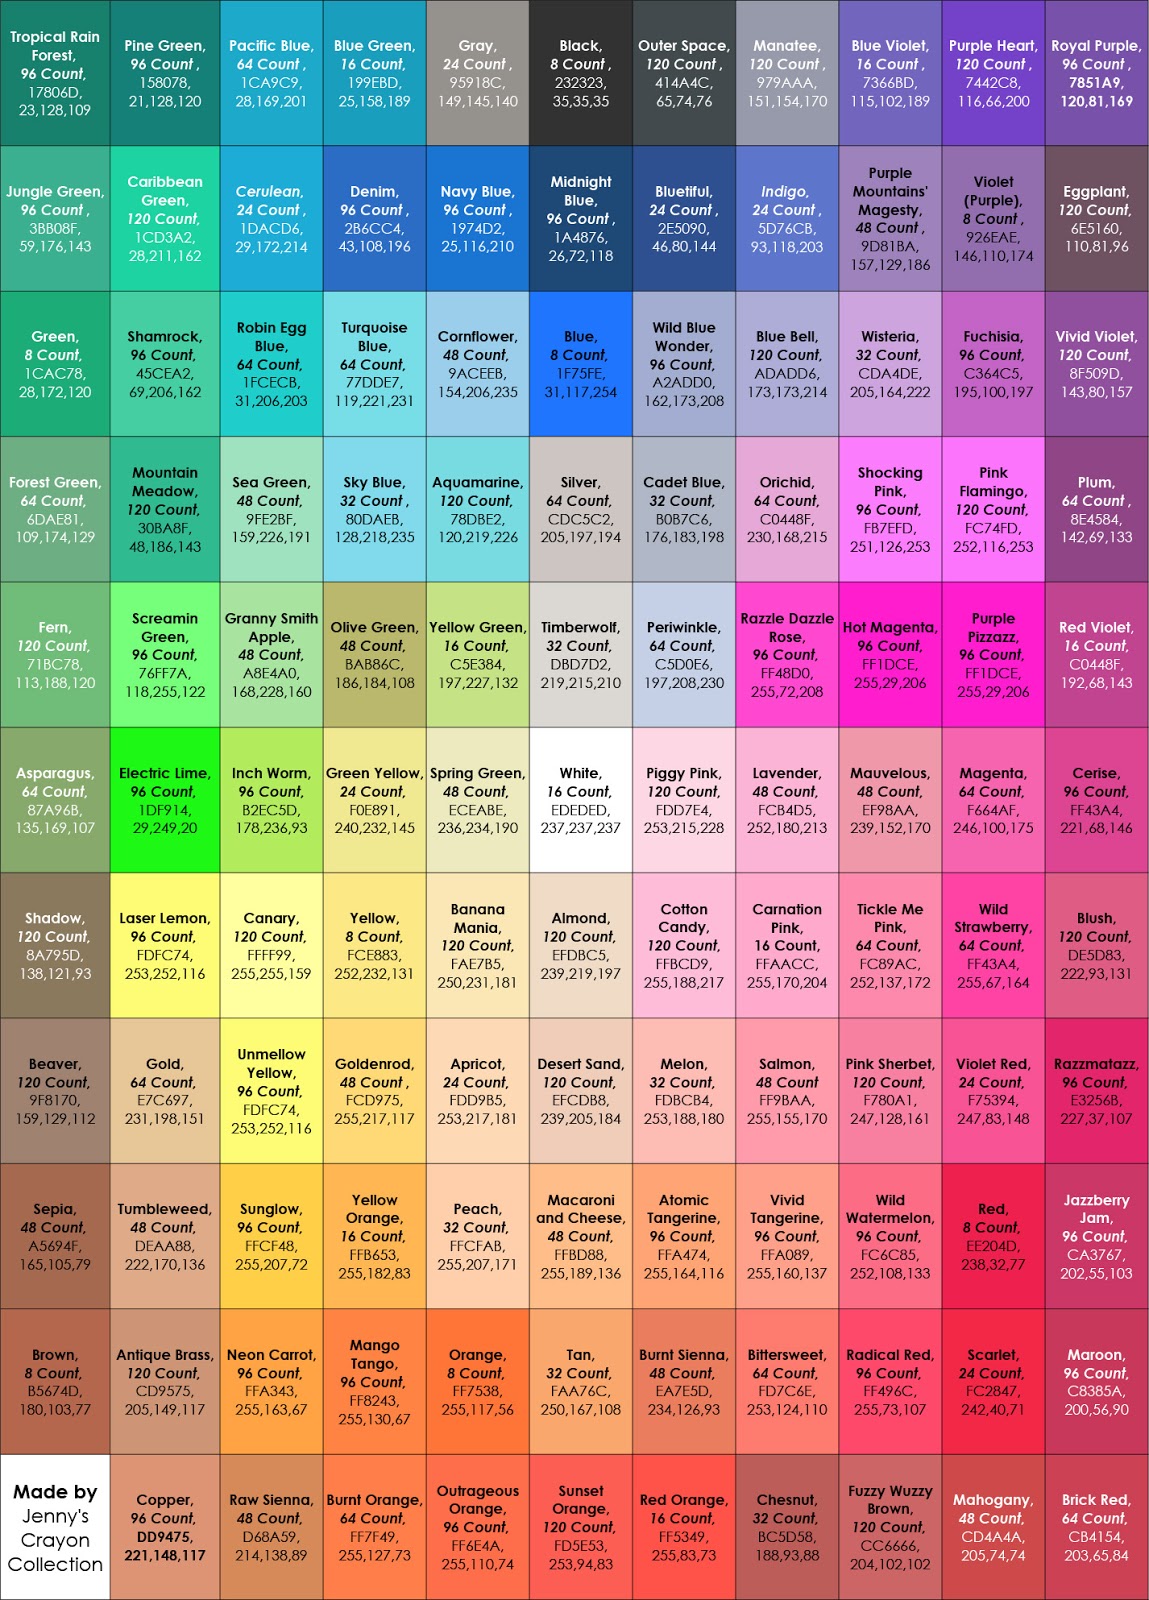 Crayola Color Chart With Names